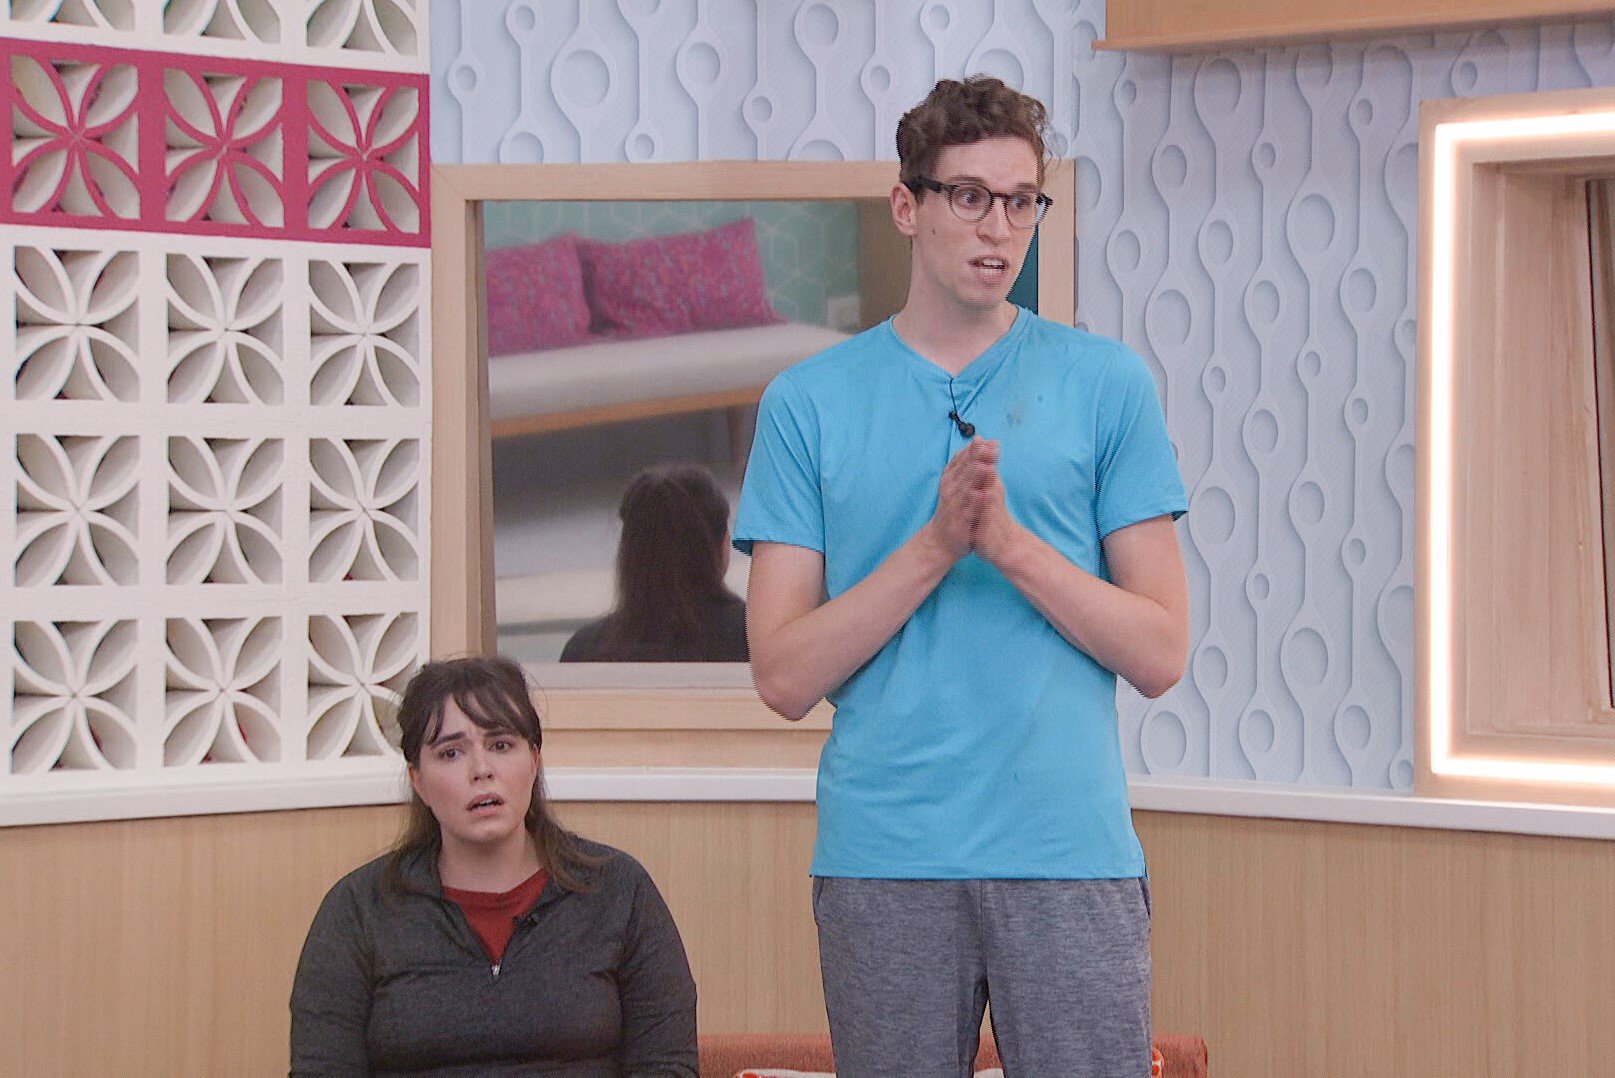 Brittany Hoopes and Michael Bruner during the 'Big Brother 24' double eviction. Brittany, who is sitting in the nomination chairs, wears a dark gray pullover over a red shirt. Michael, who is standing up to give a speech, wears a light blue shirt, gray pants, and glasses.